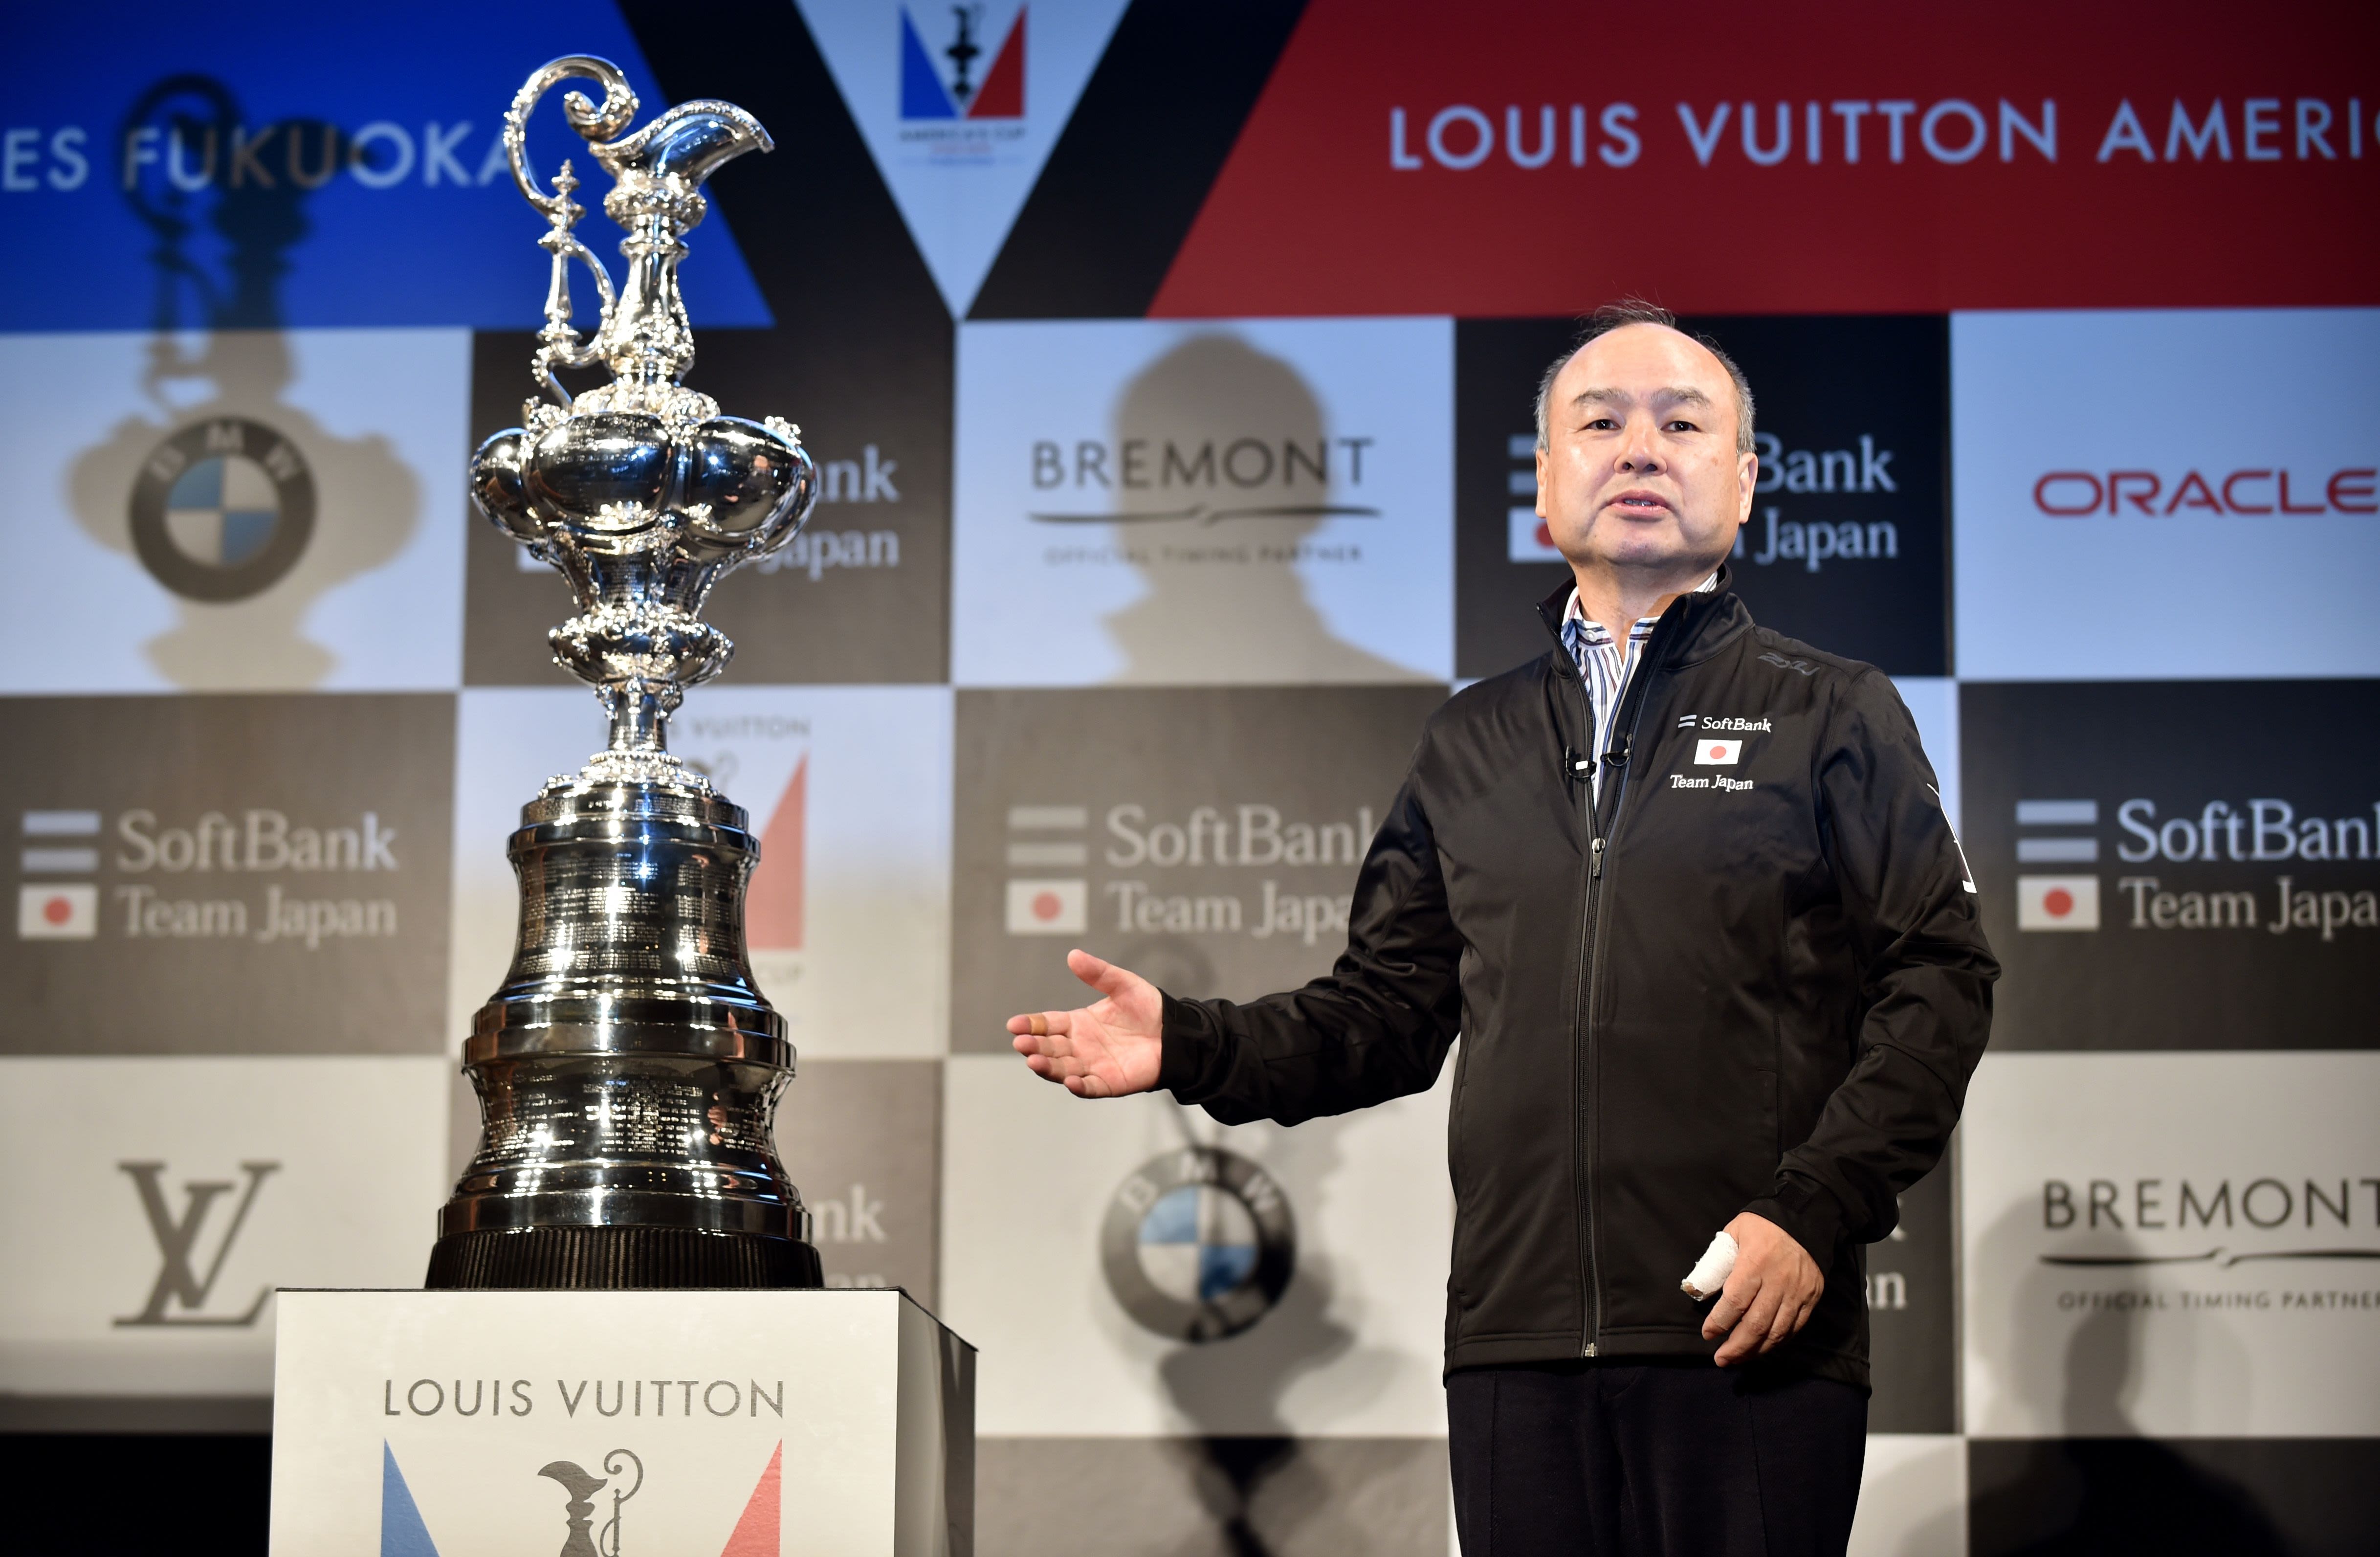 LOUIS VUITTON - Louis Vuitton Events AND THE LOUIS VUITTON CUP WINNER IS